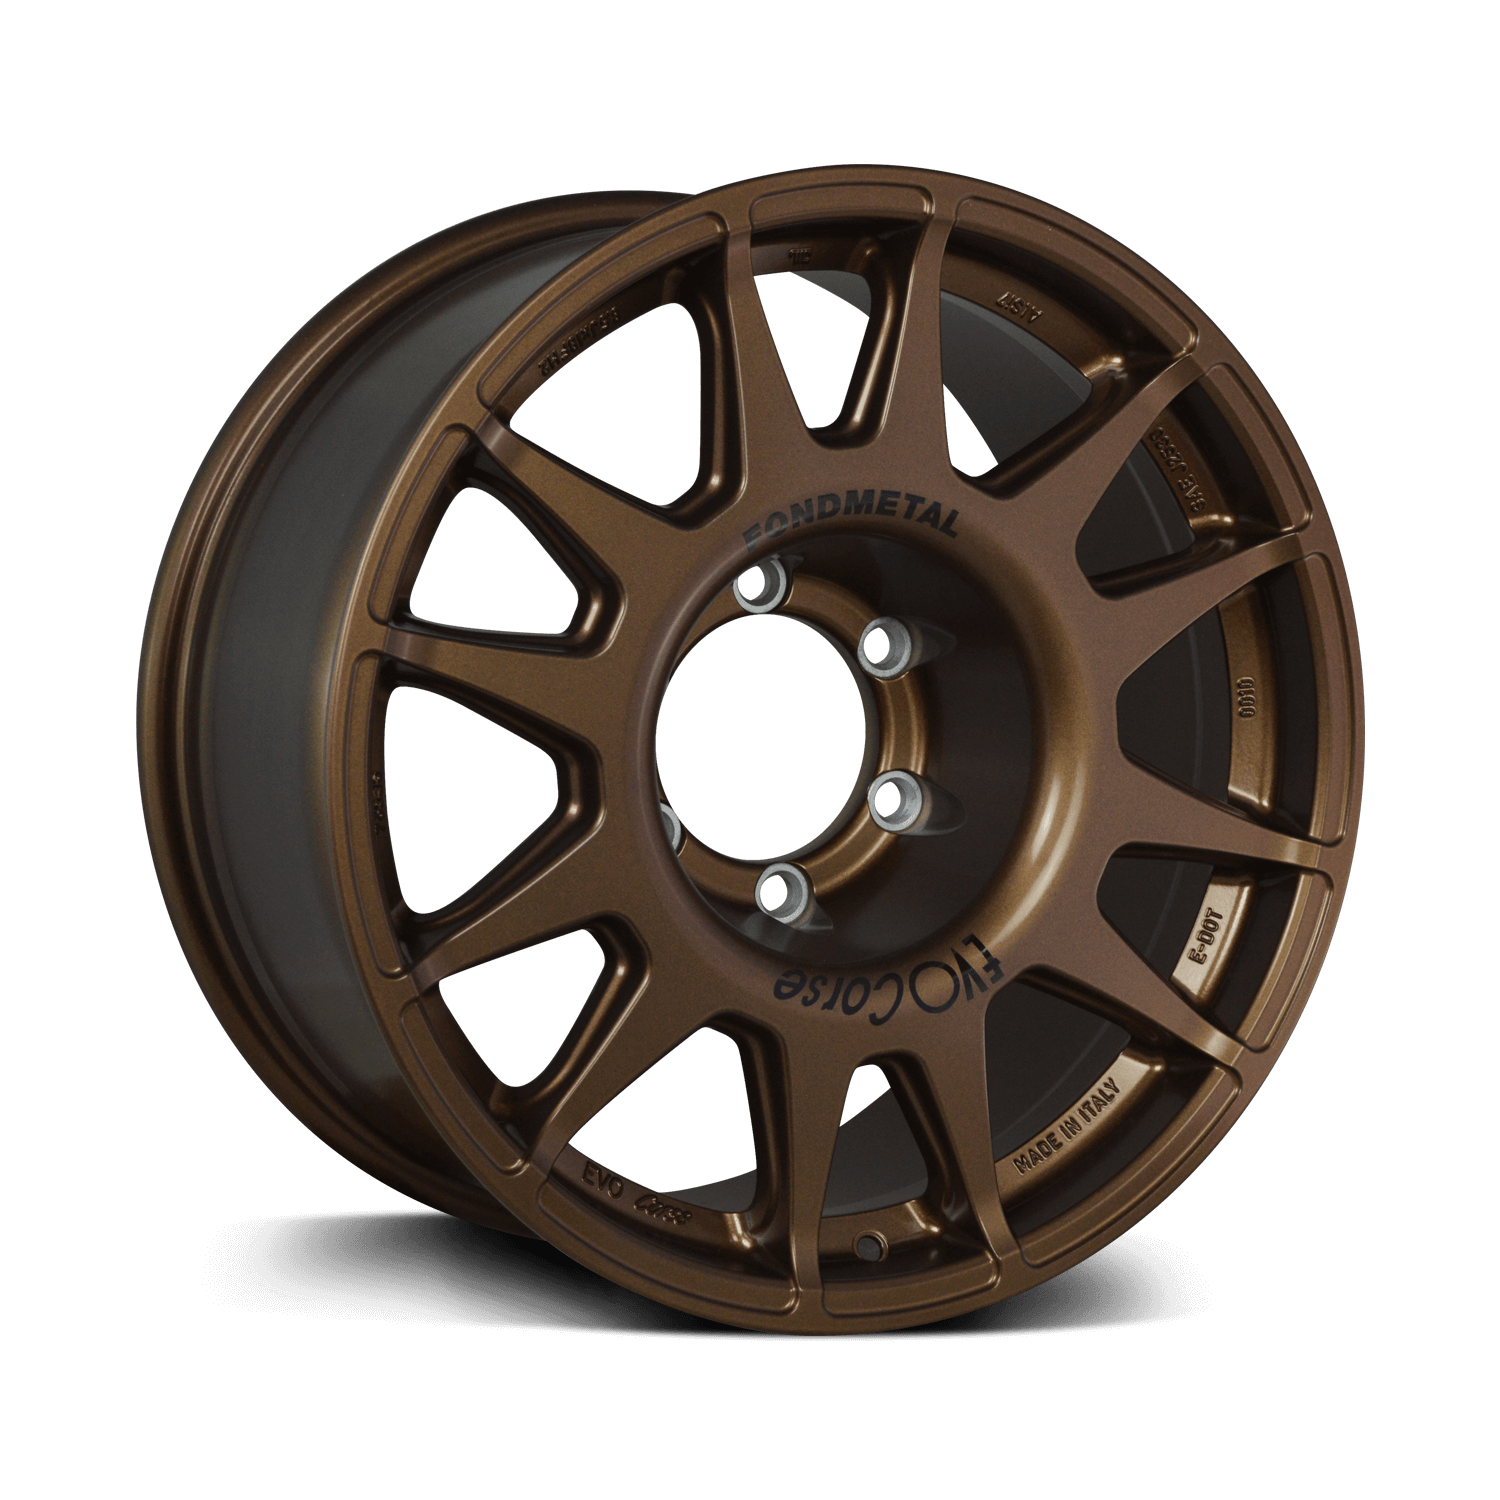 Evo Corse wheel axo view matt bronze, for toyota land cruiser 300 series, anthracite. the 4x4 off road allow wheel with the highest high load rating for overlanding, rally, 4wd expedition use in australia. lc300 wheels, 300 series wheels, 300 series landcruiser wheels, what is the best offset for you land cruiser 300 wheels? This 18x8.5 ET47. Best wheel for GVM upgrade 